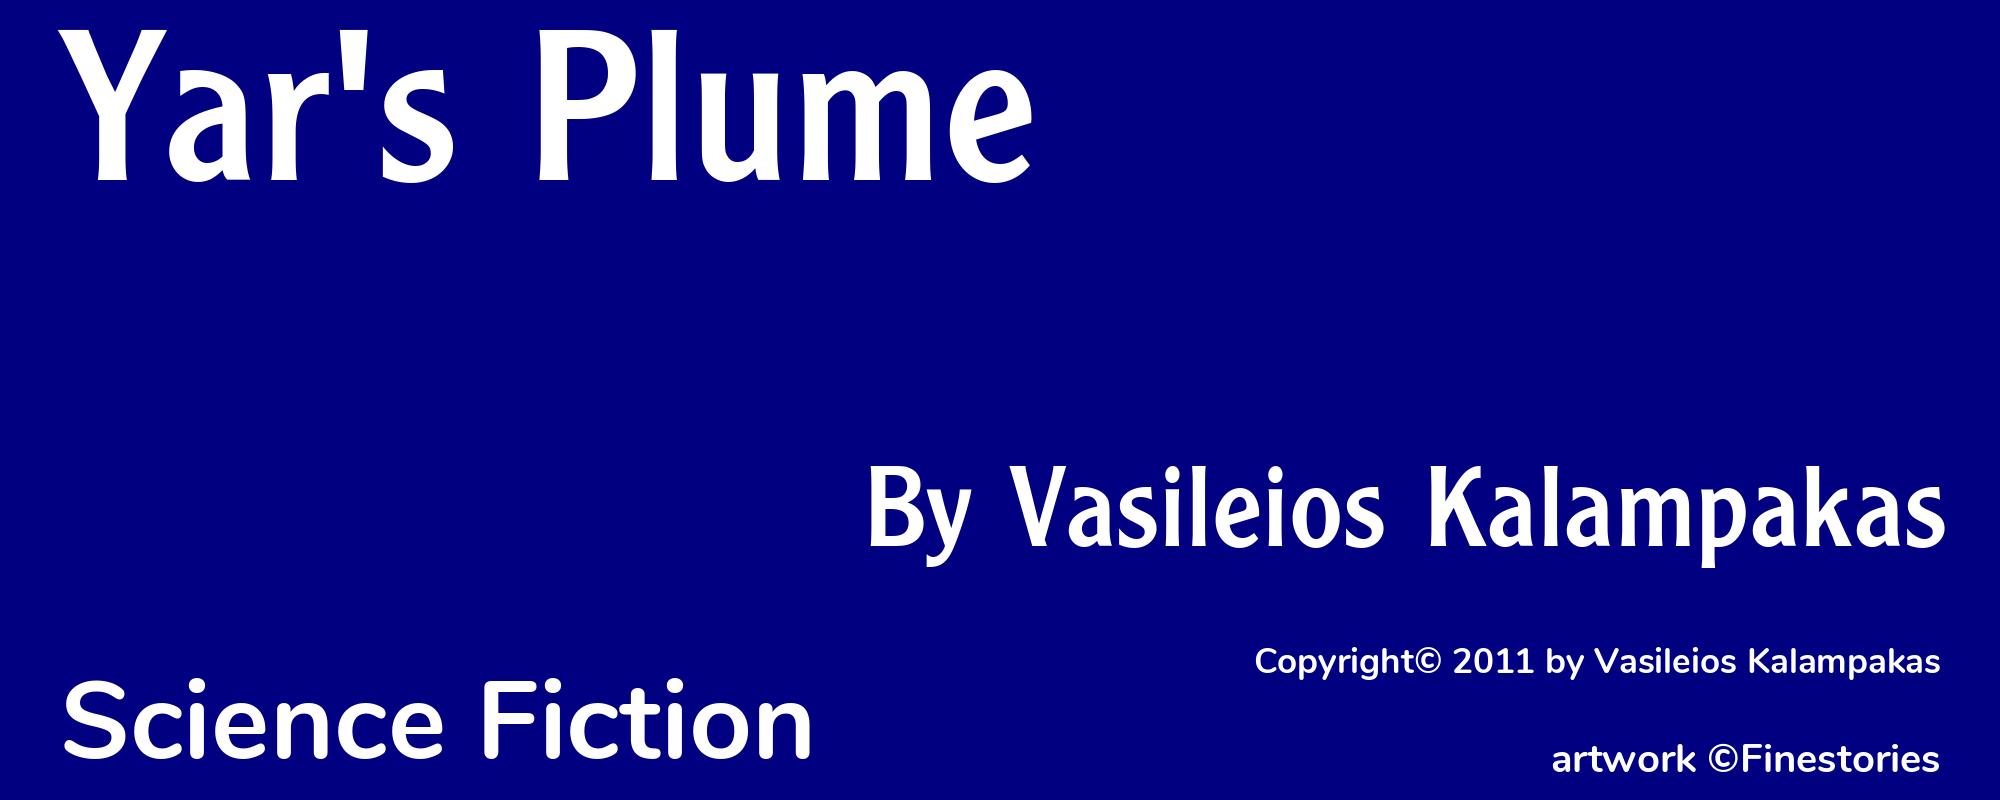 Yar's Plume - Cover